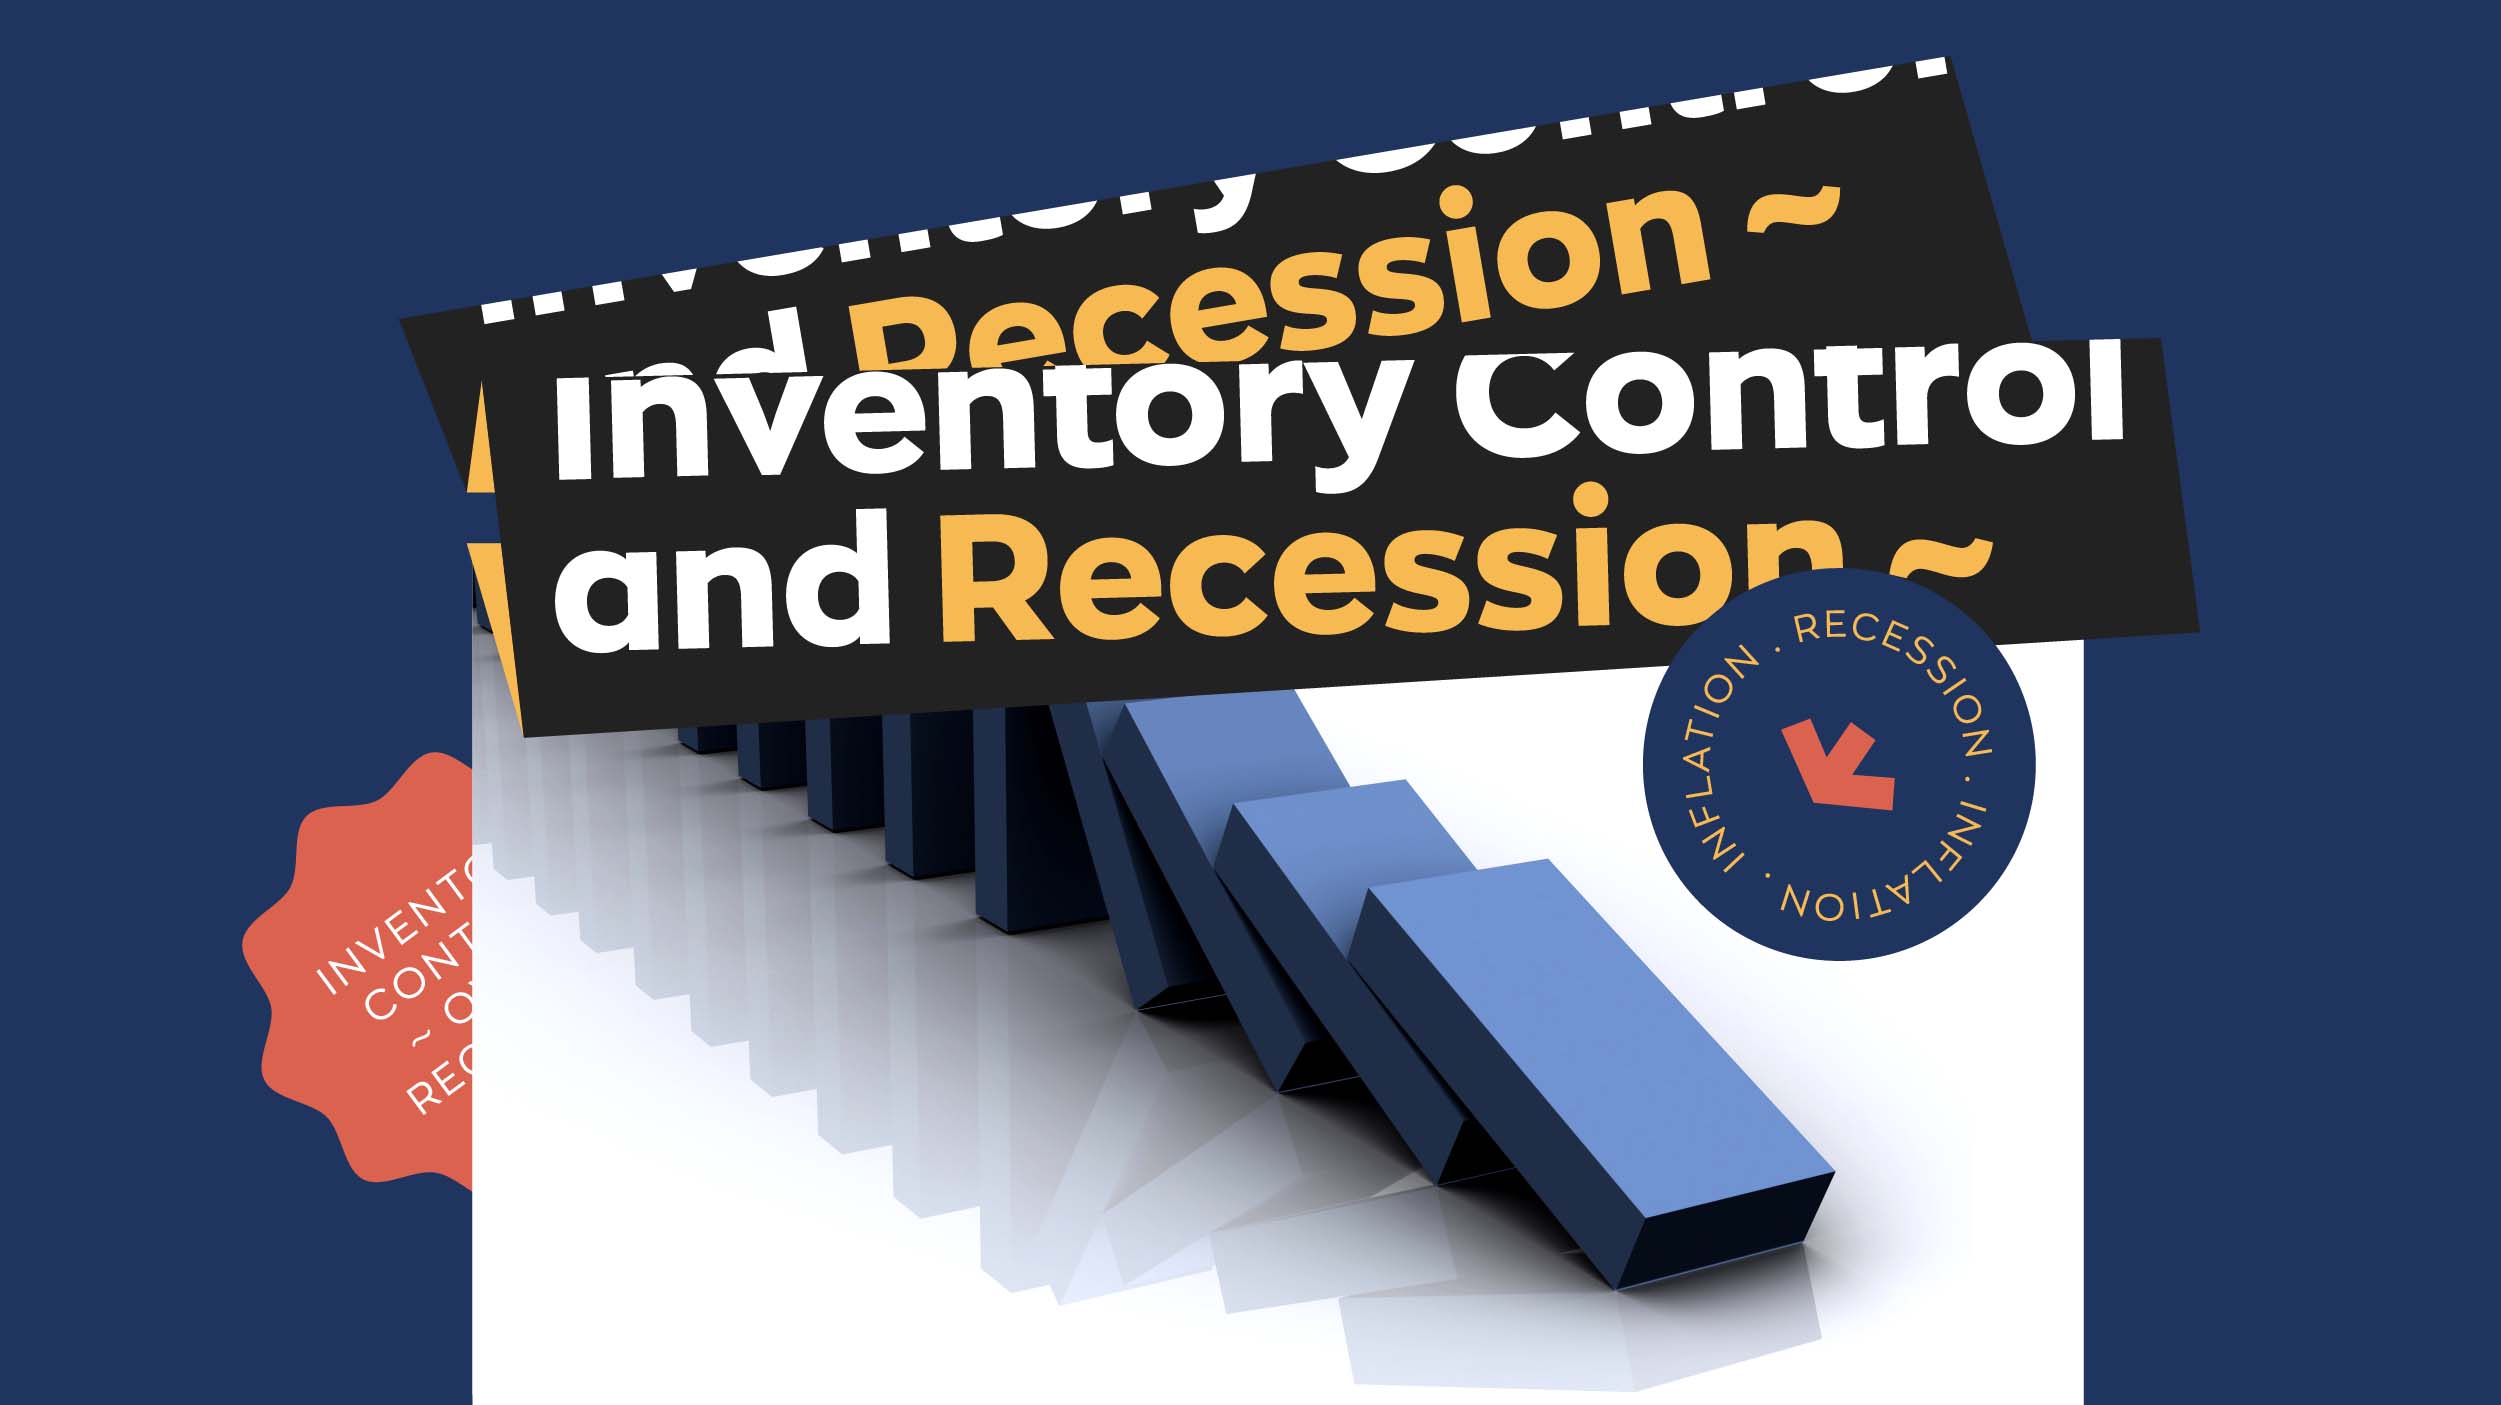 Inventory Control and Recession